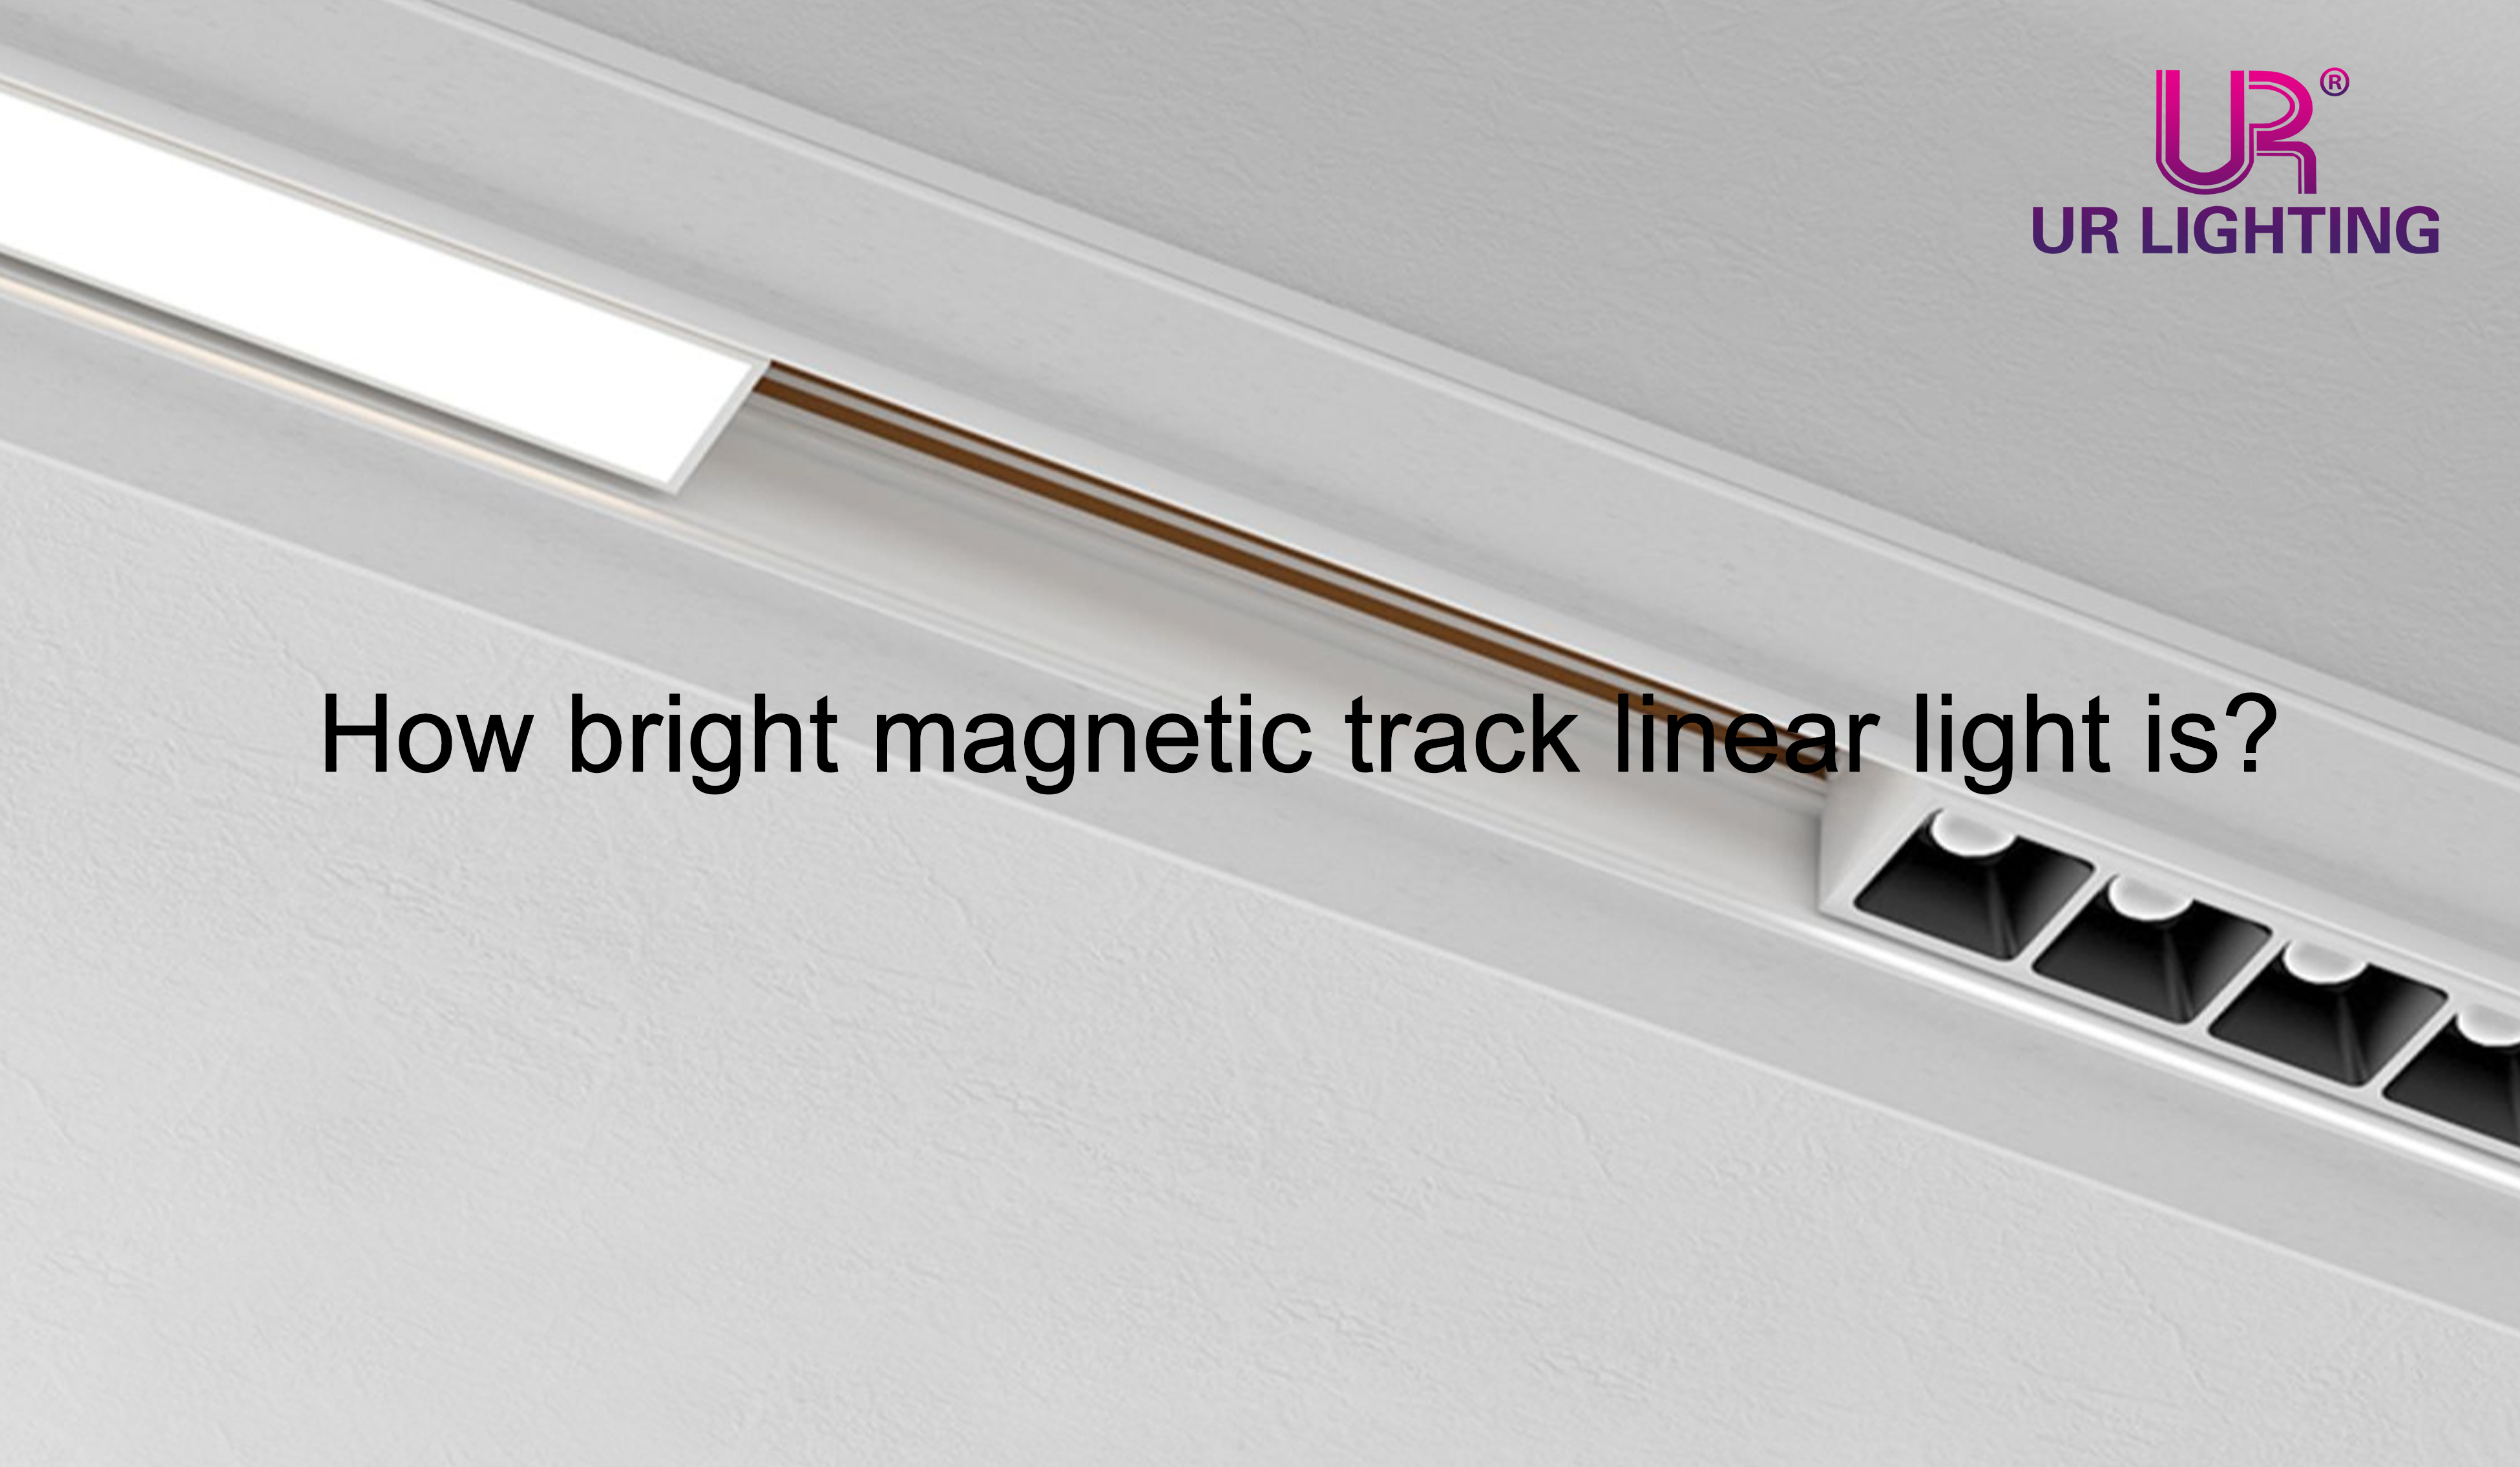 How bright magnetic track linear light is?